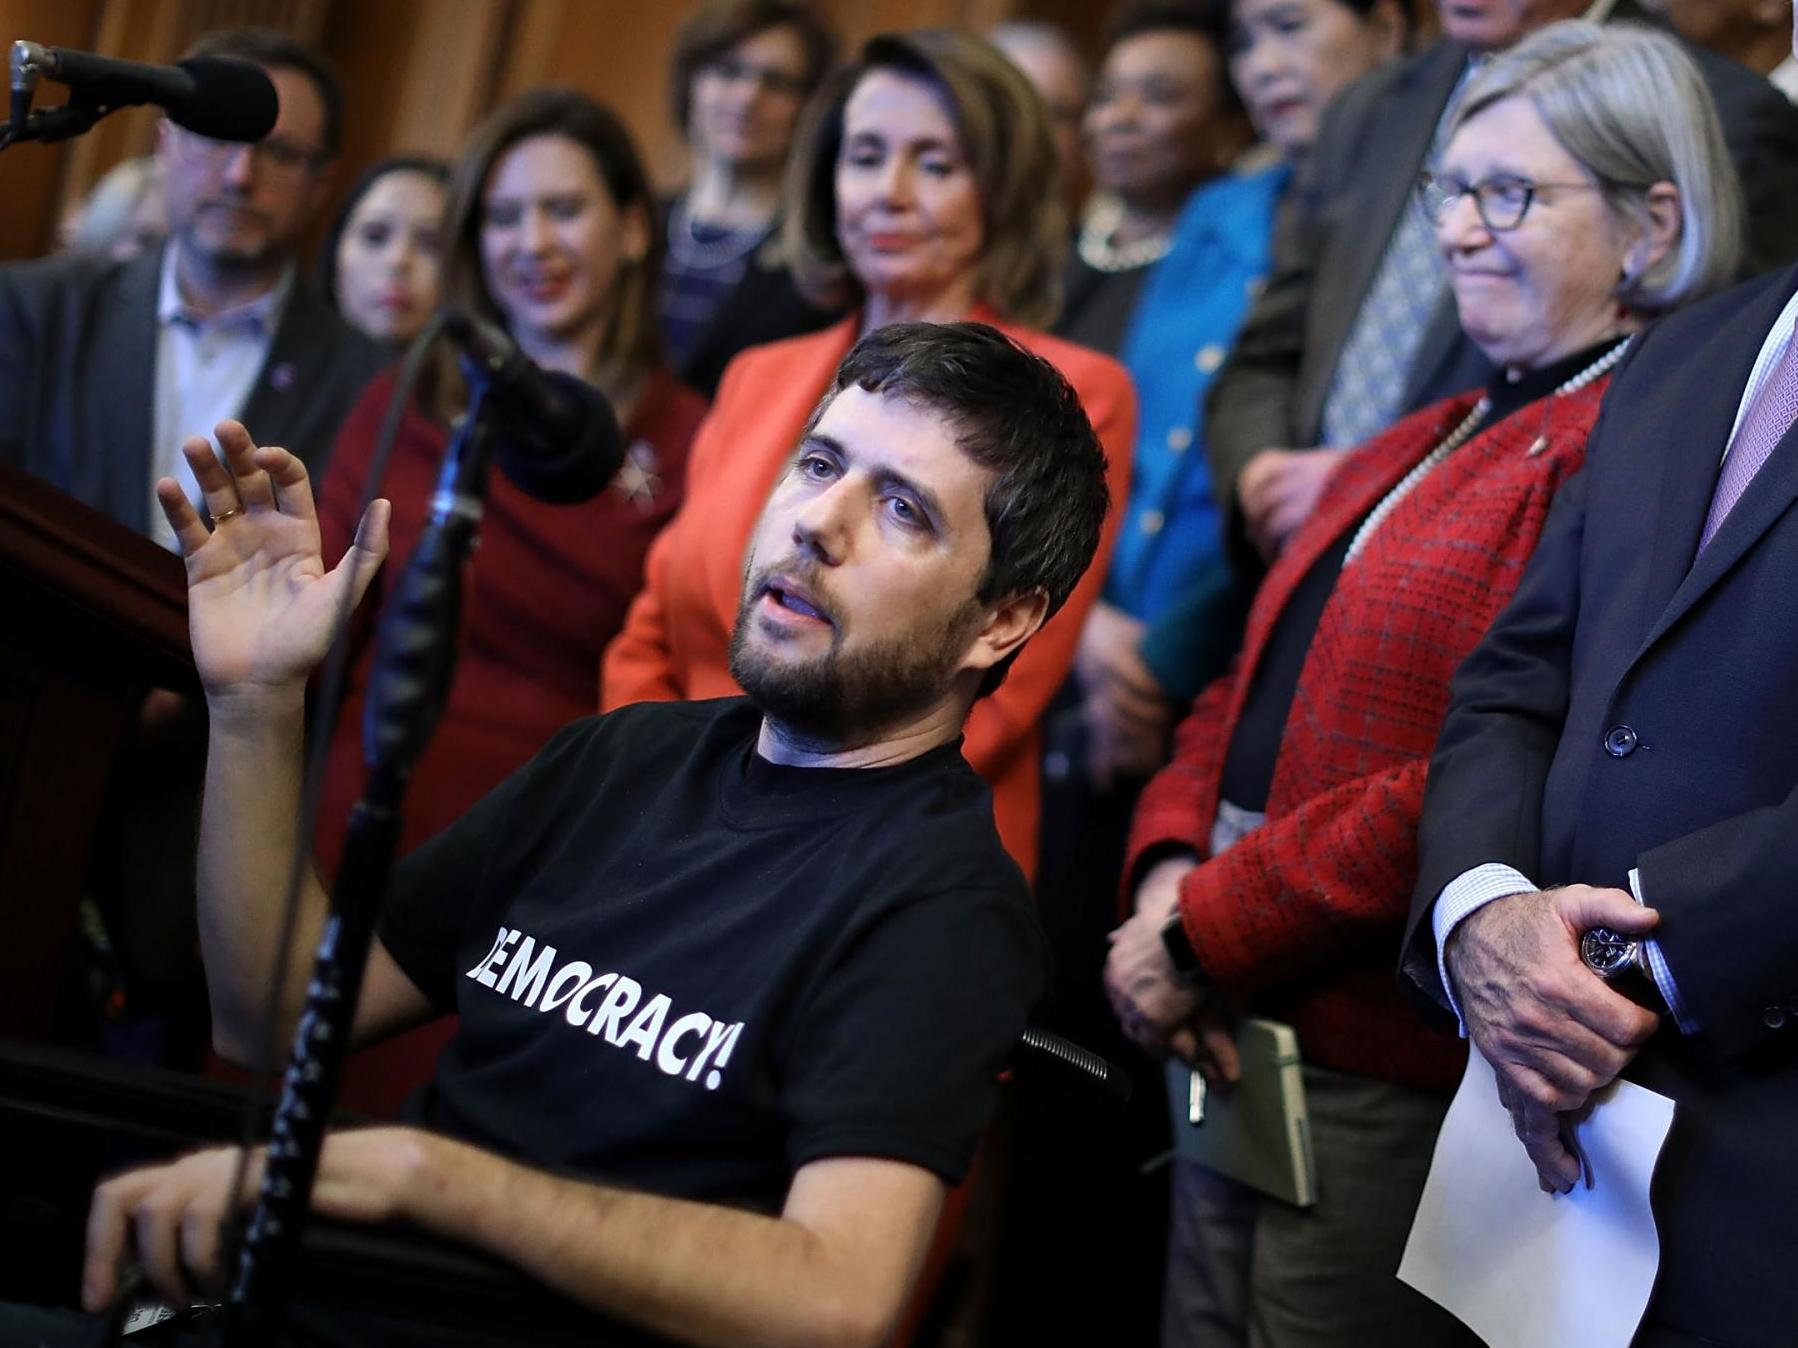 Ady Barkan: Dying ALS patient delivers passionate speech on first day of Medicare-for-All hearings